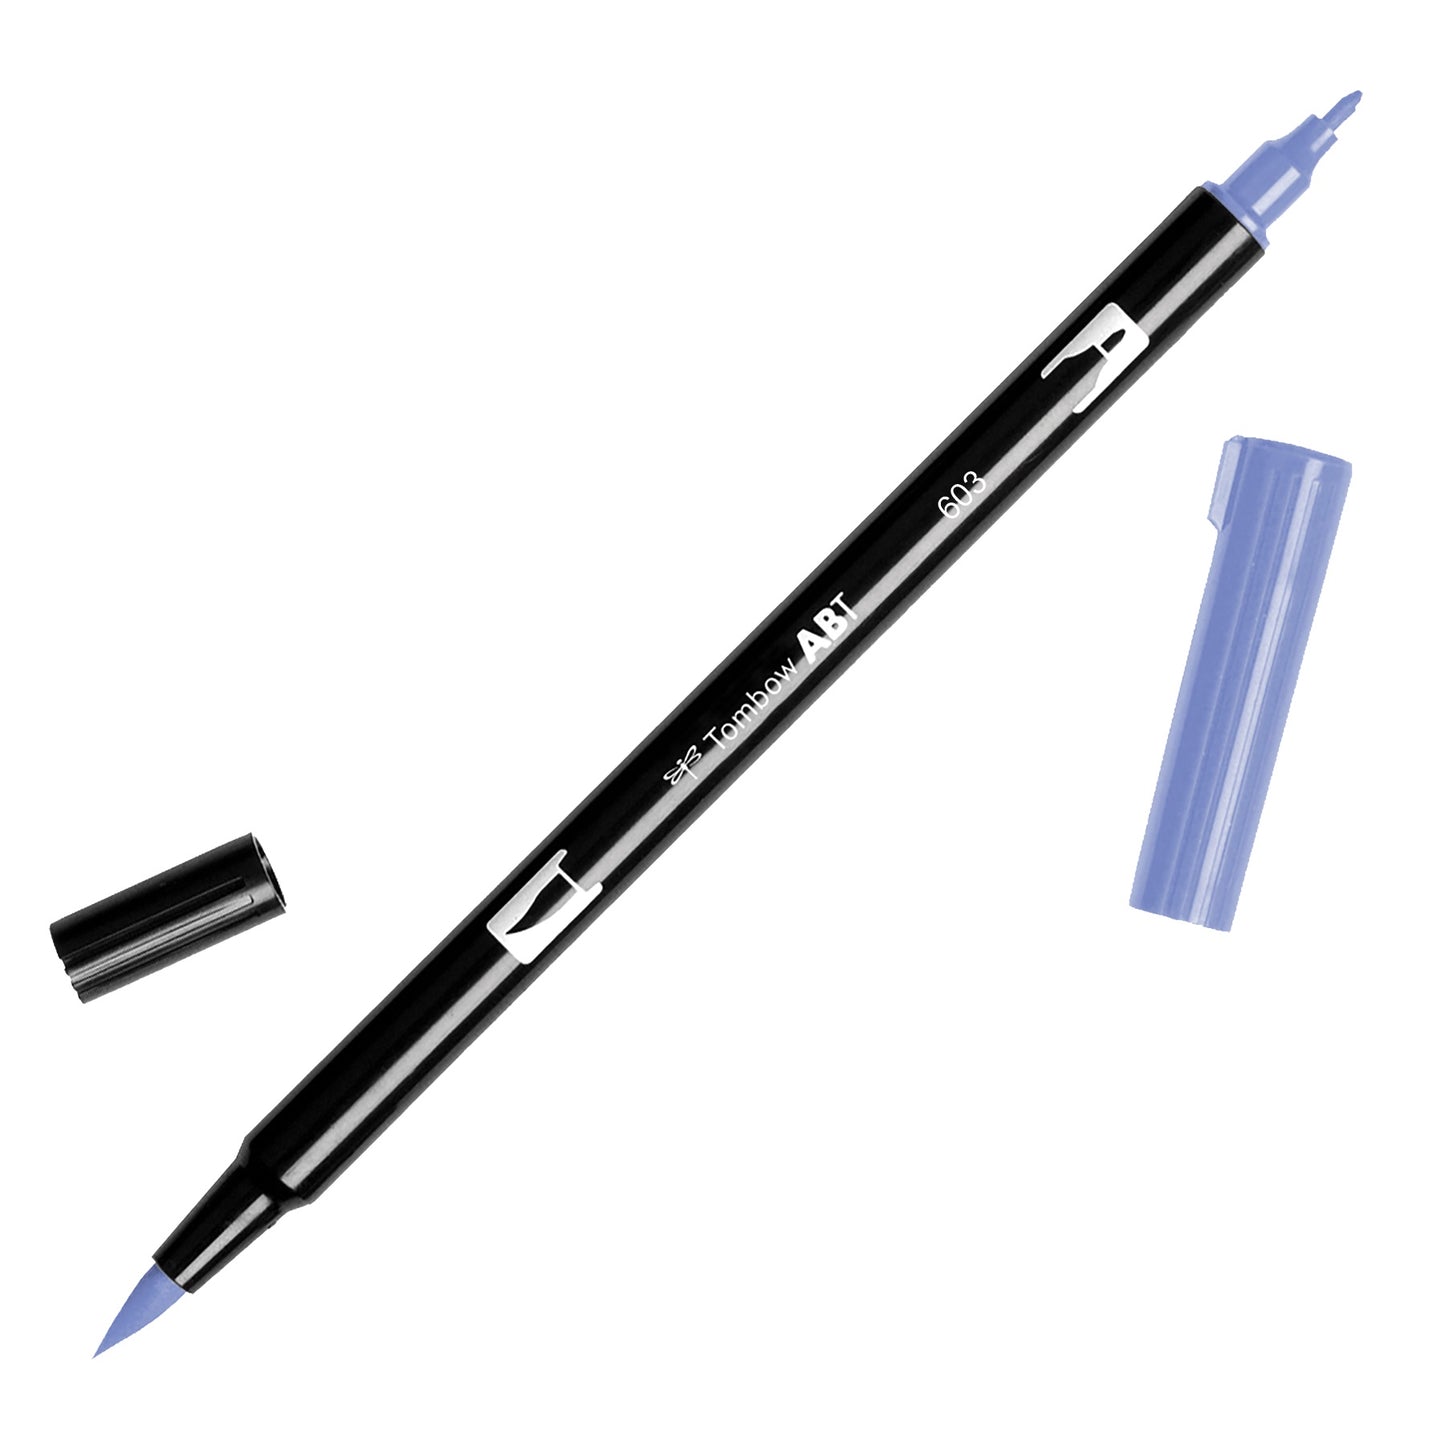 TOMBOW 603 PERIWINKLE DUAL BRUSH MARKER